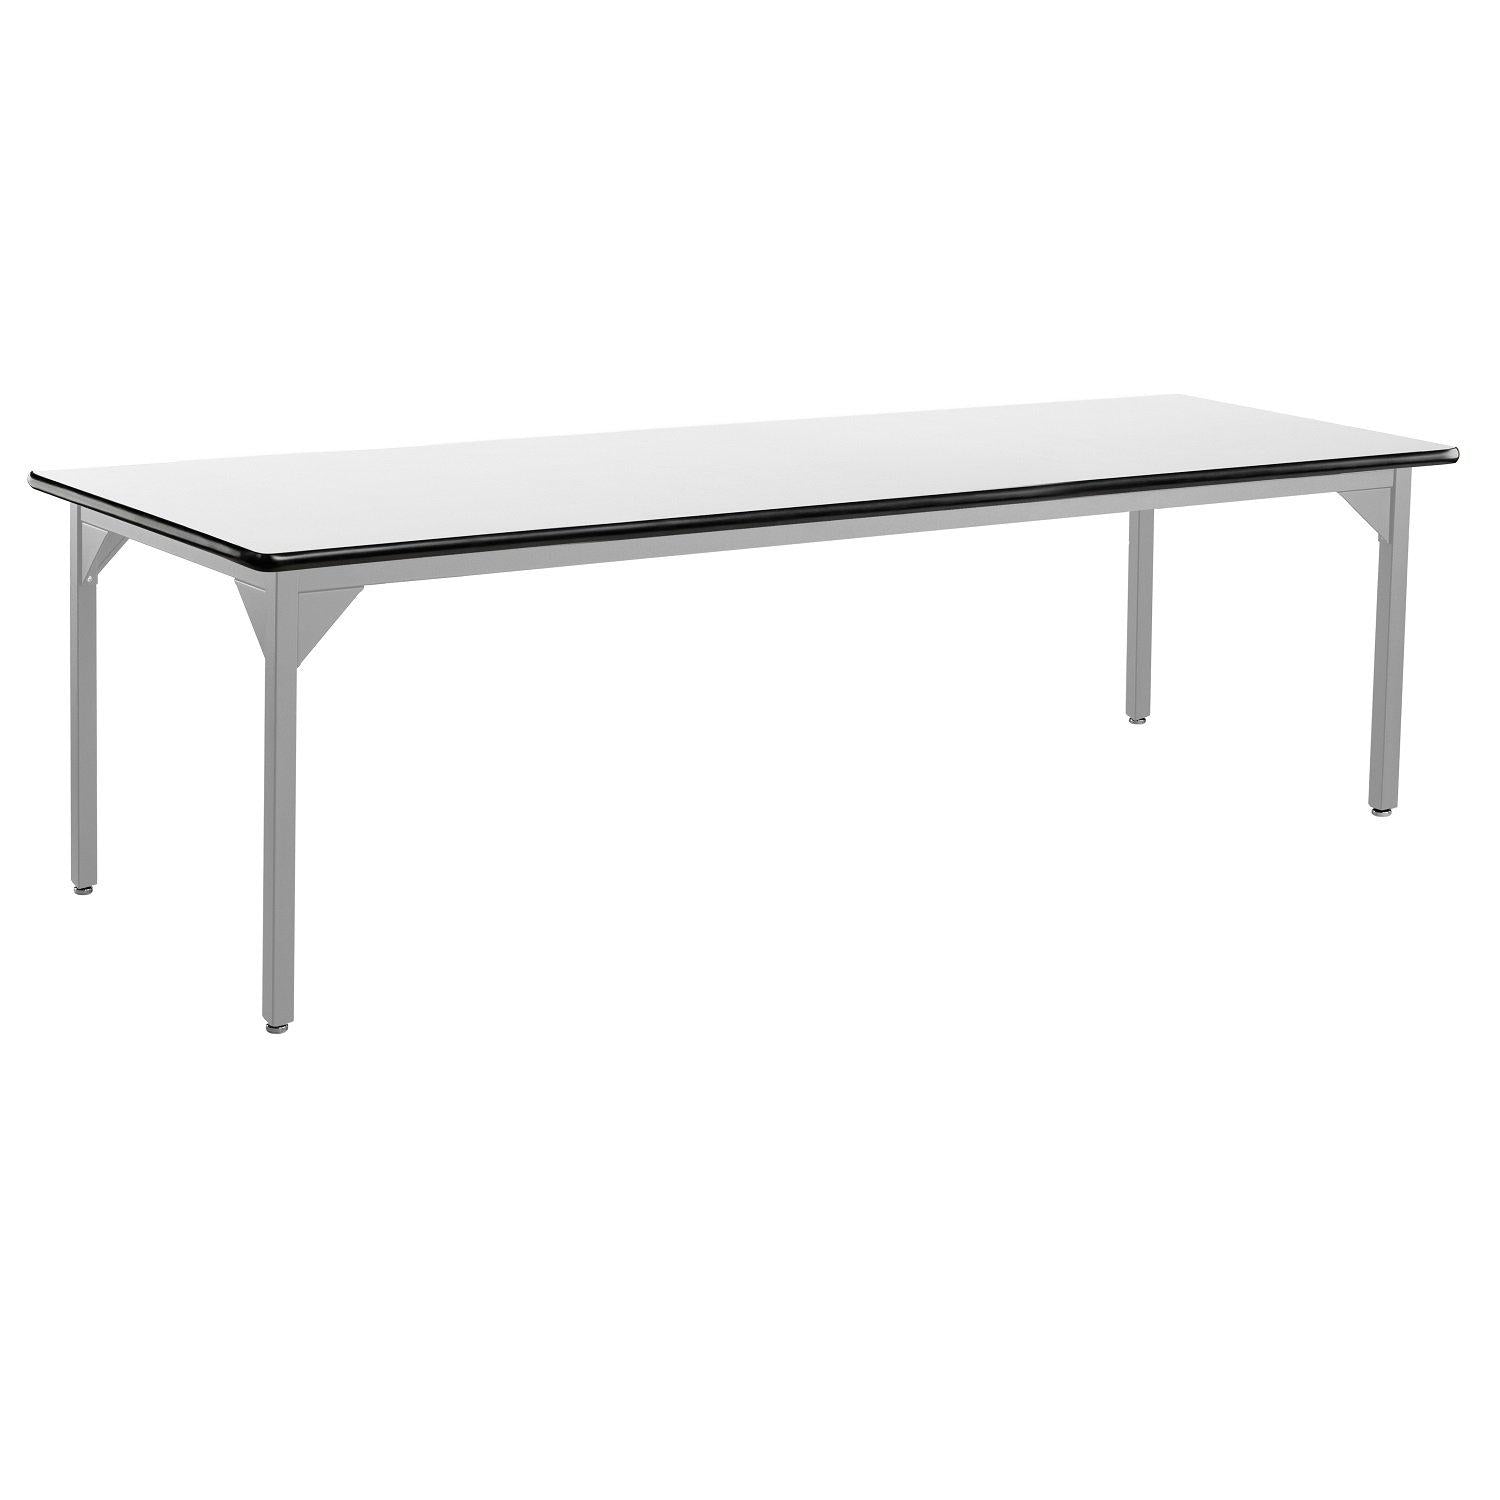 Heavy-Duty Fixed Height Utility Table, Soft Grey Frame, 48" x 96", Whiteboard High-Pressure Laminate Top